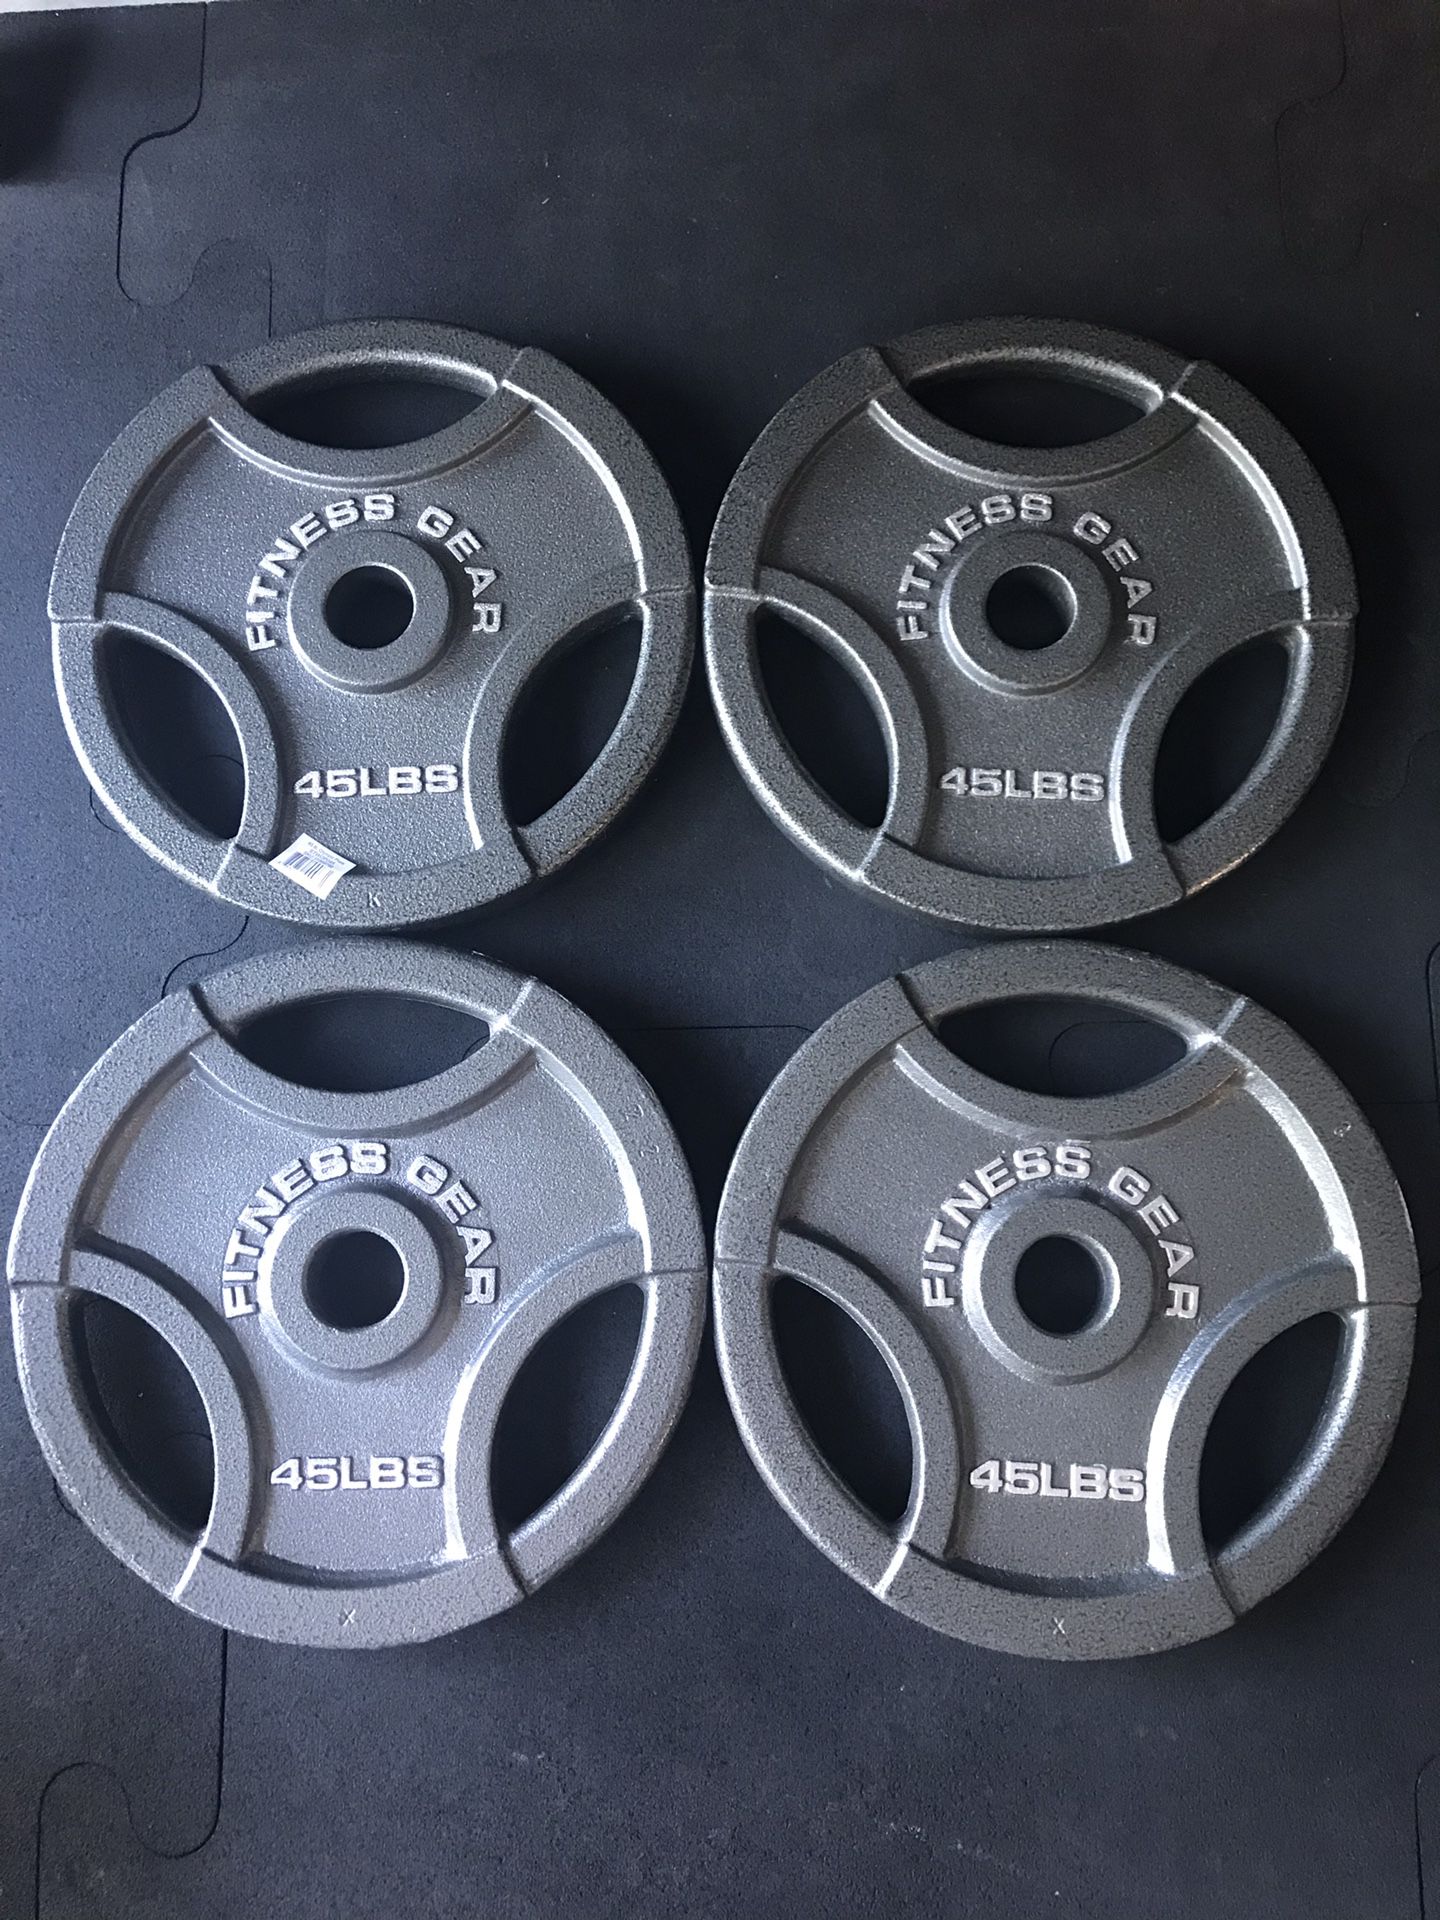 Olympic weight plates (4x45Lbs) for $380 Firm on Price ***Brand New***